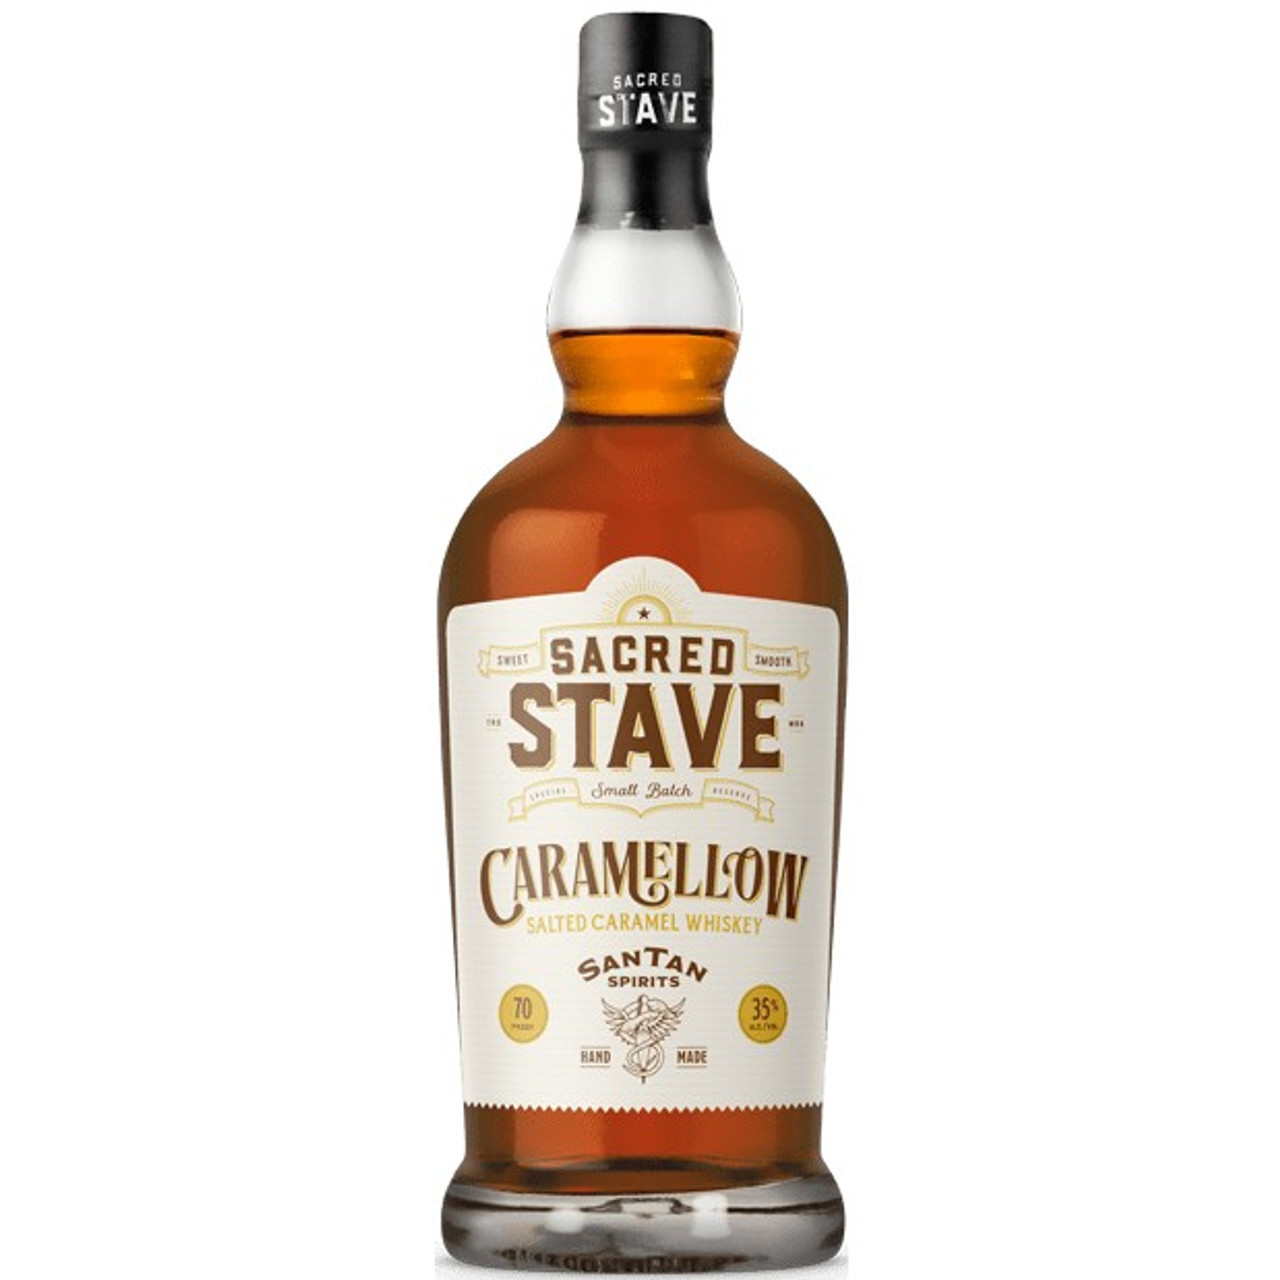 Santan Spirits Caramellow Salted Caramel Whiskey Lucky S Liquor Alcohol Delivered Now